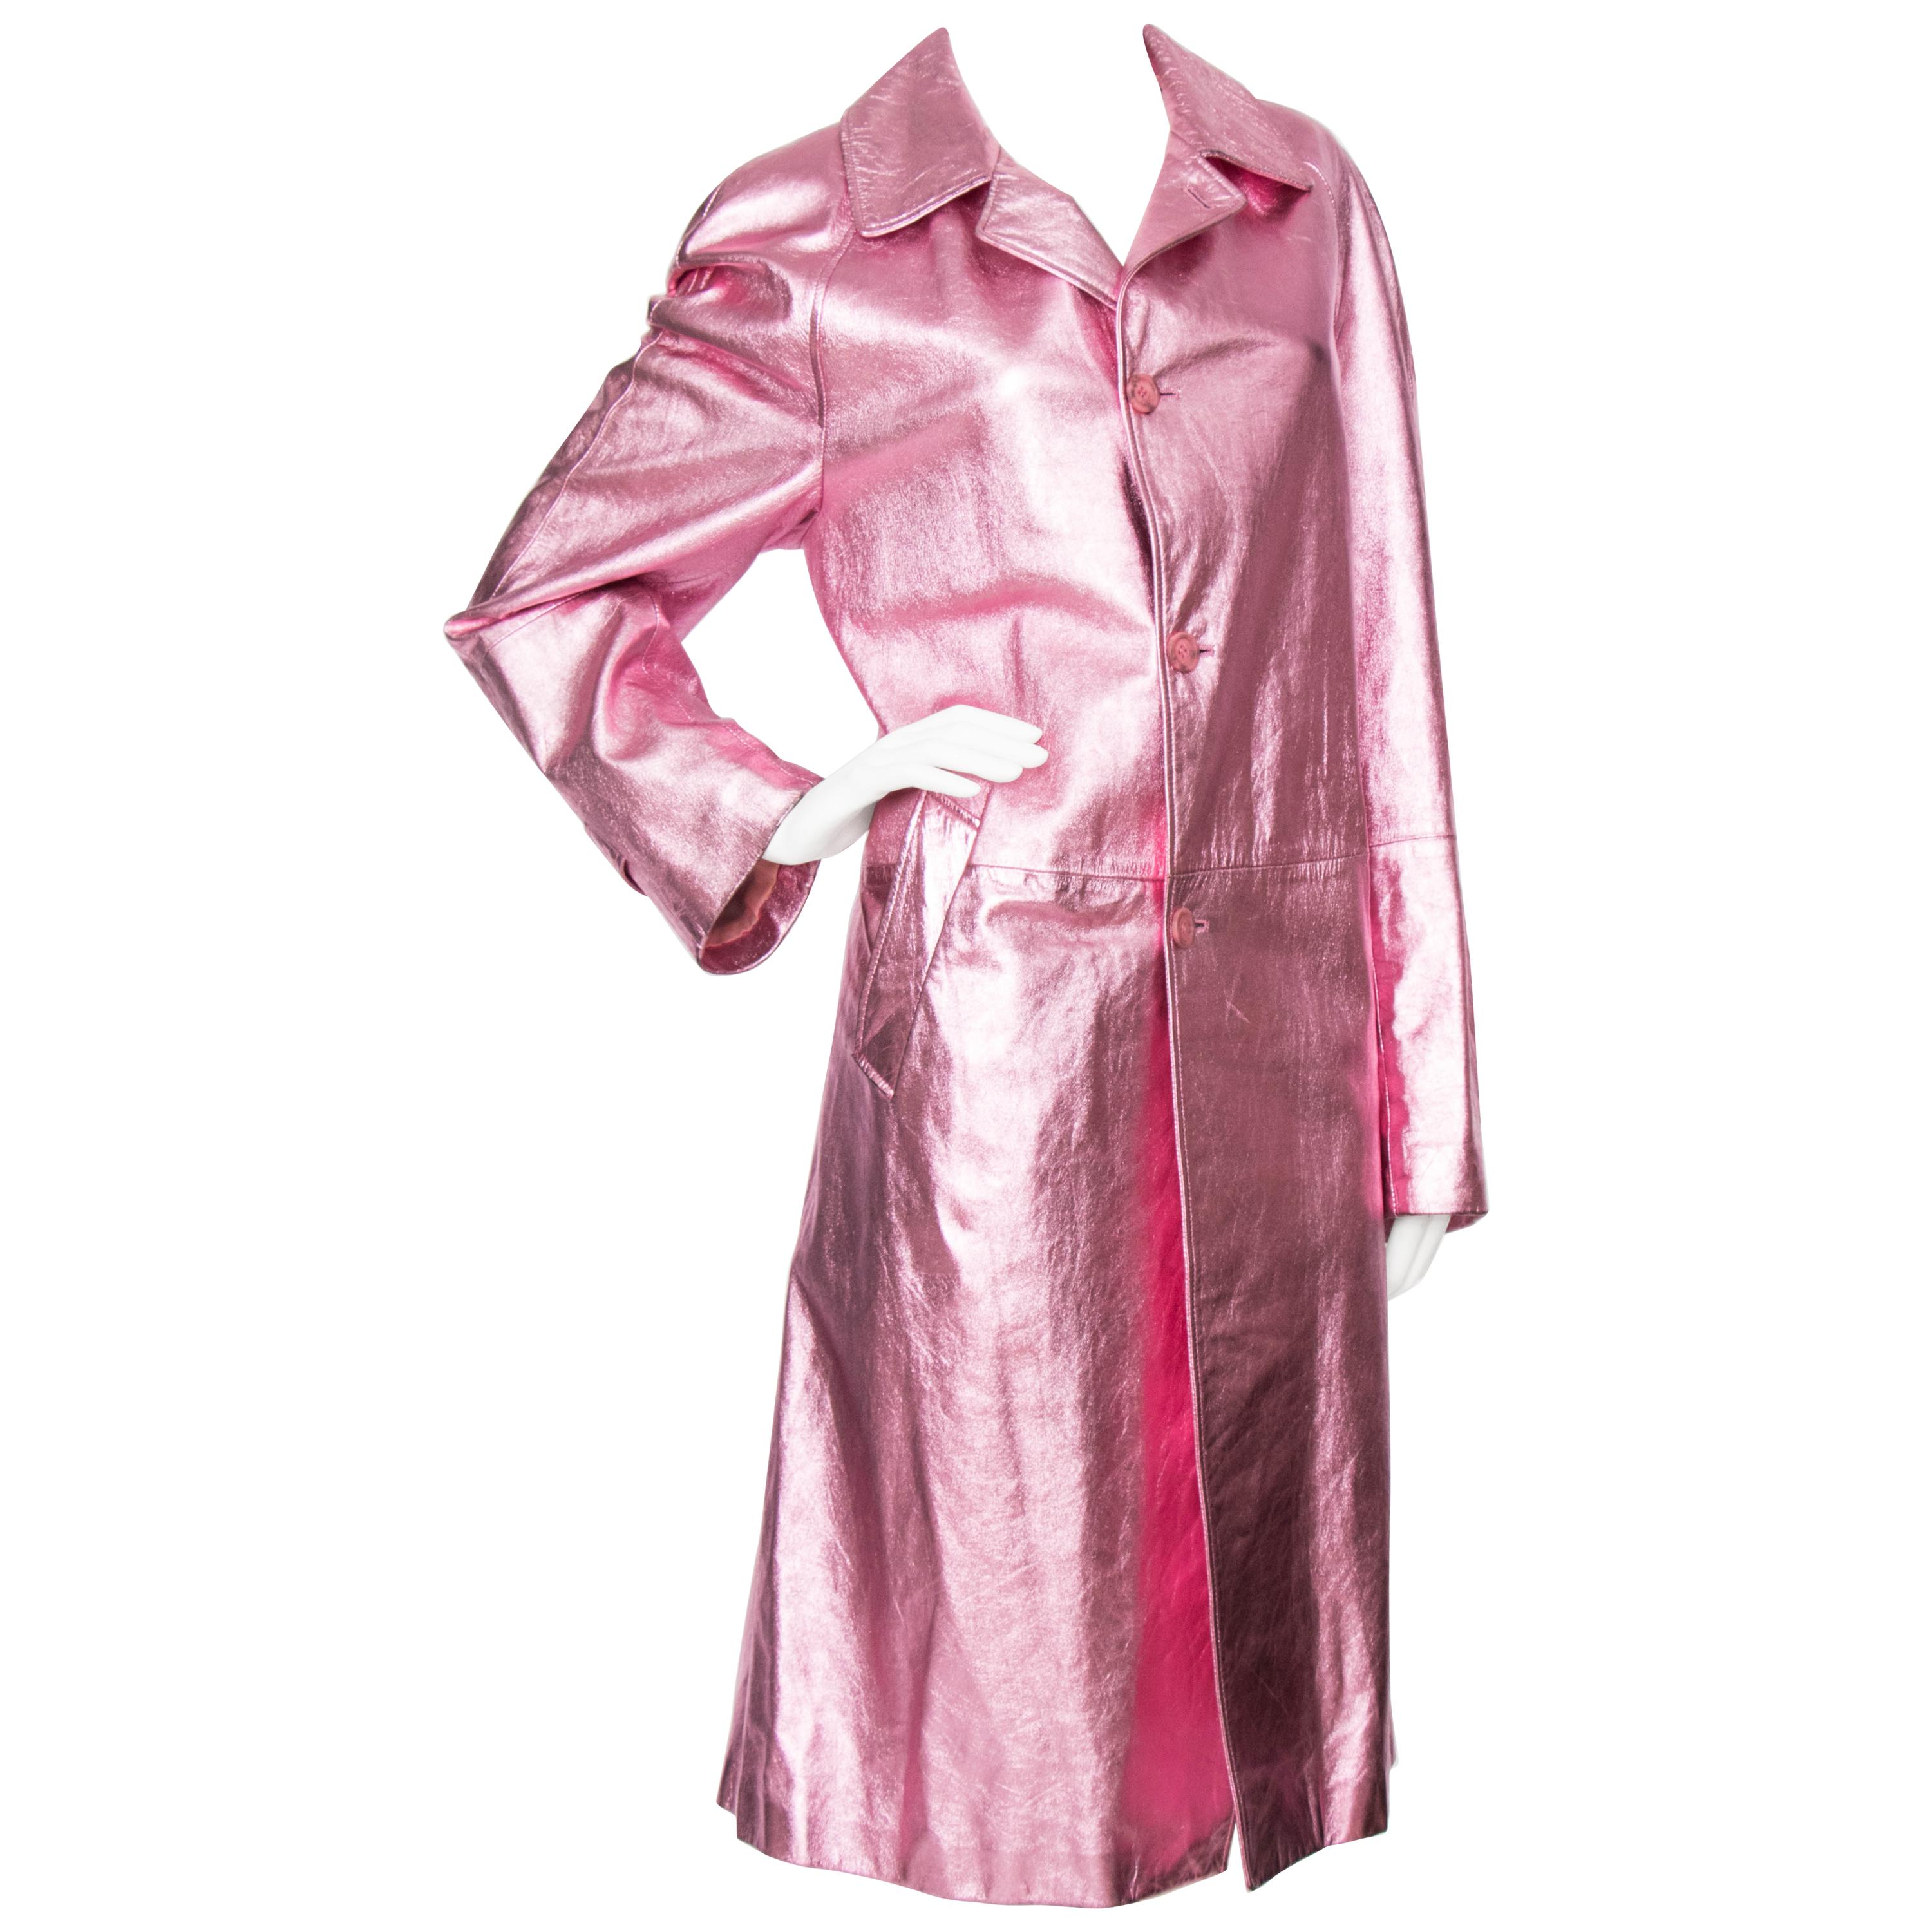 A 1990s Pink Metallic Gianni Versace Leather Jacket at 1stDibs